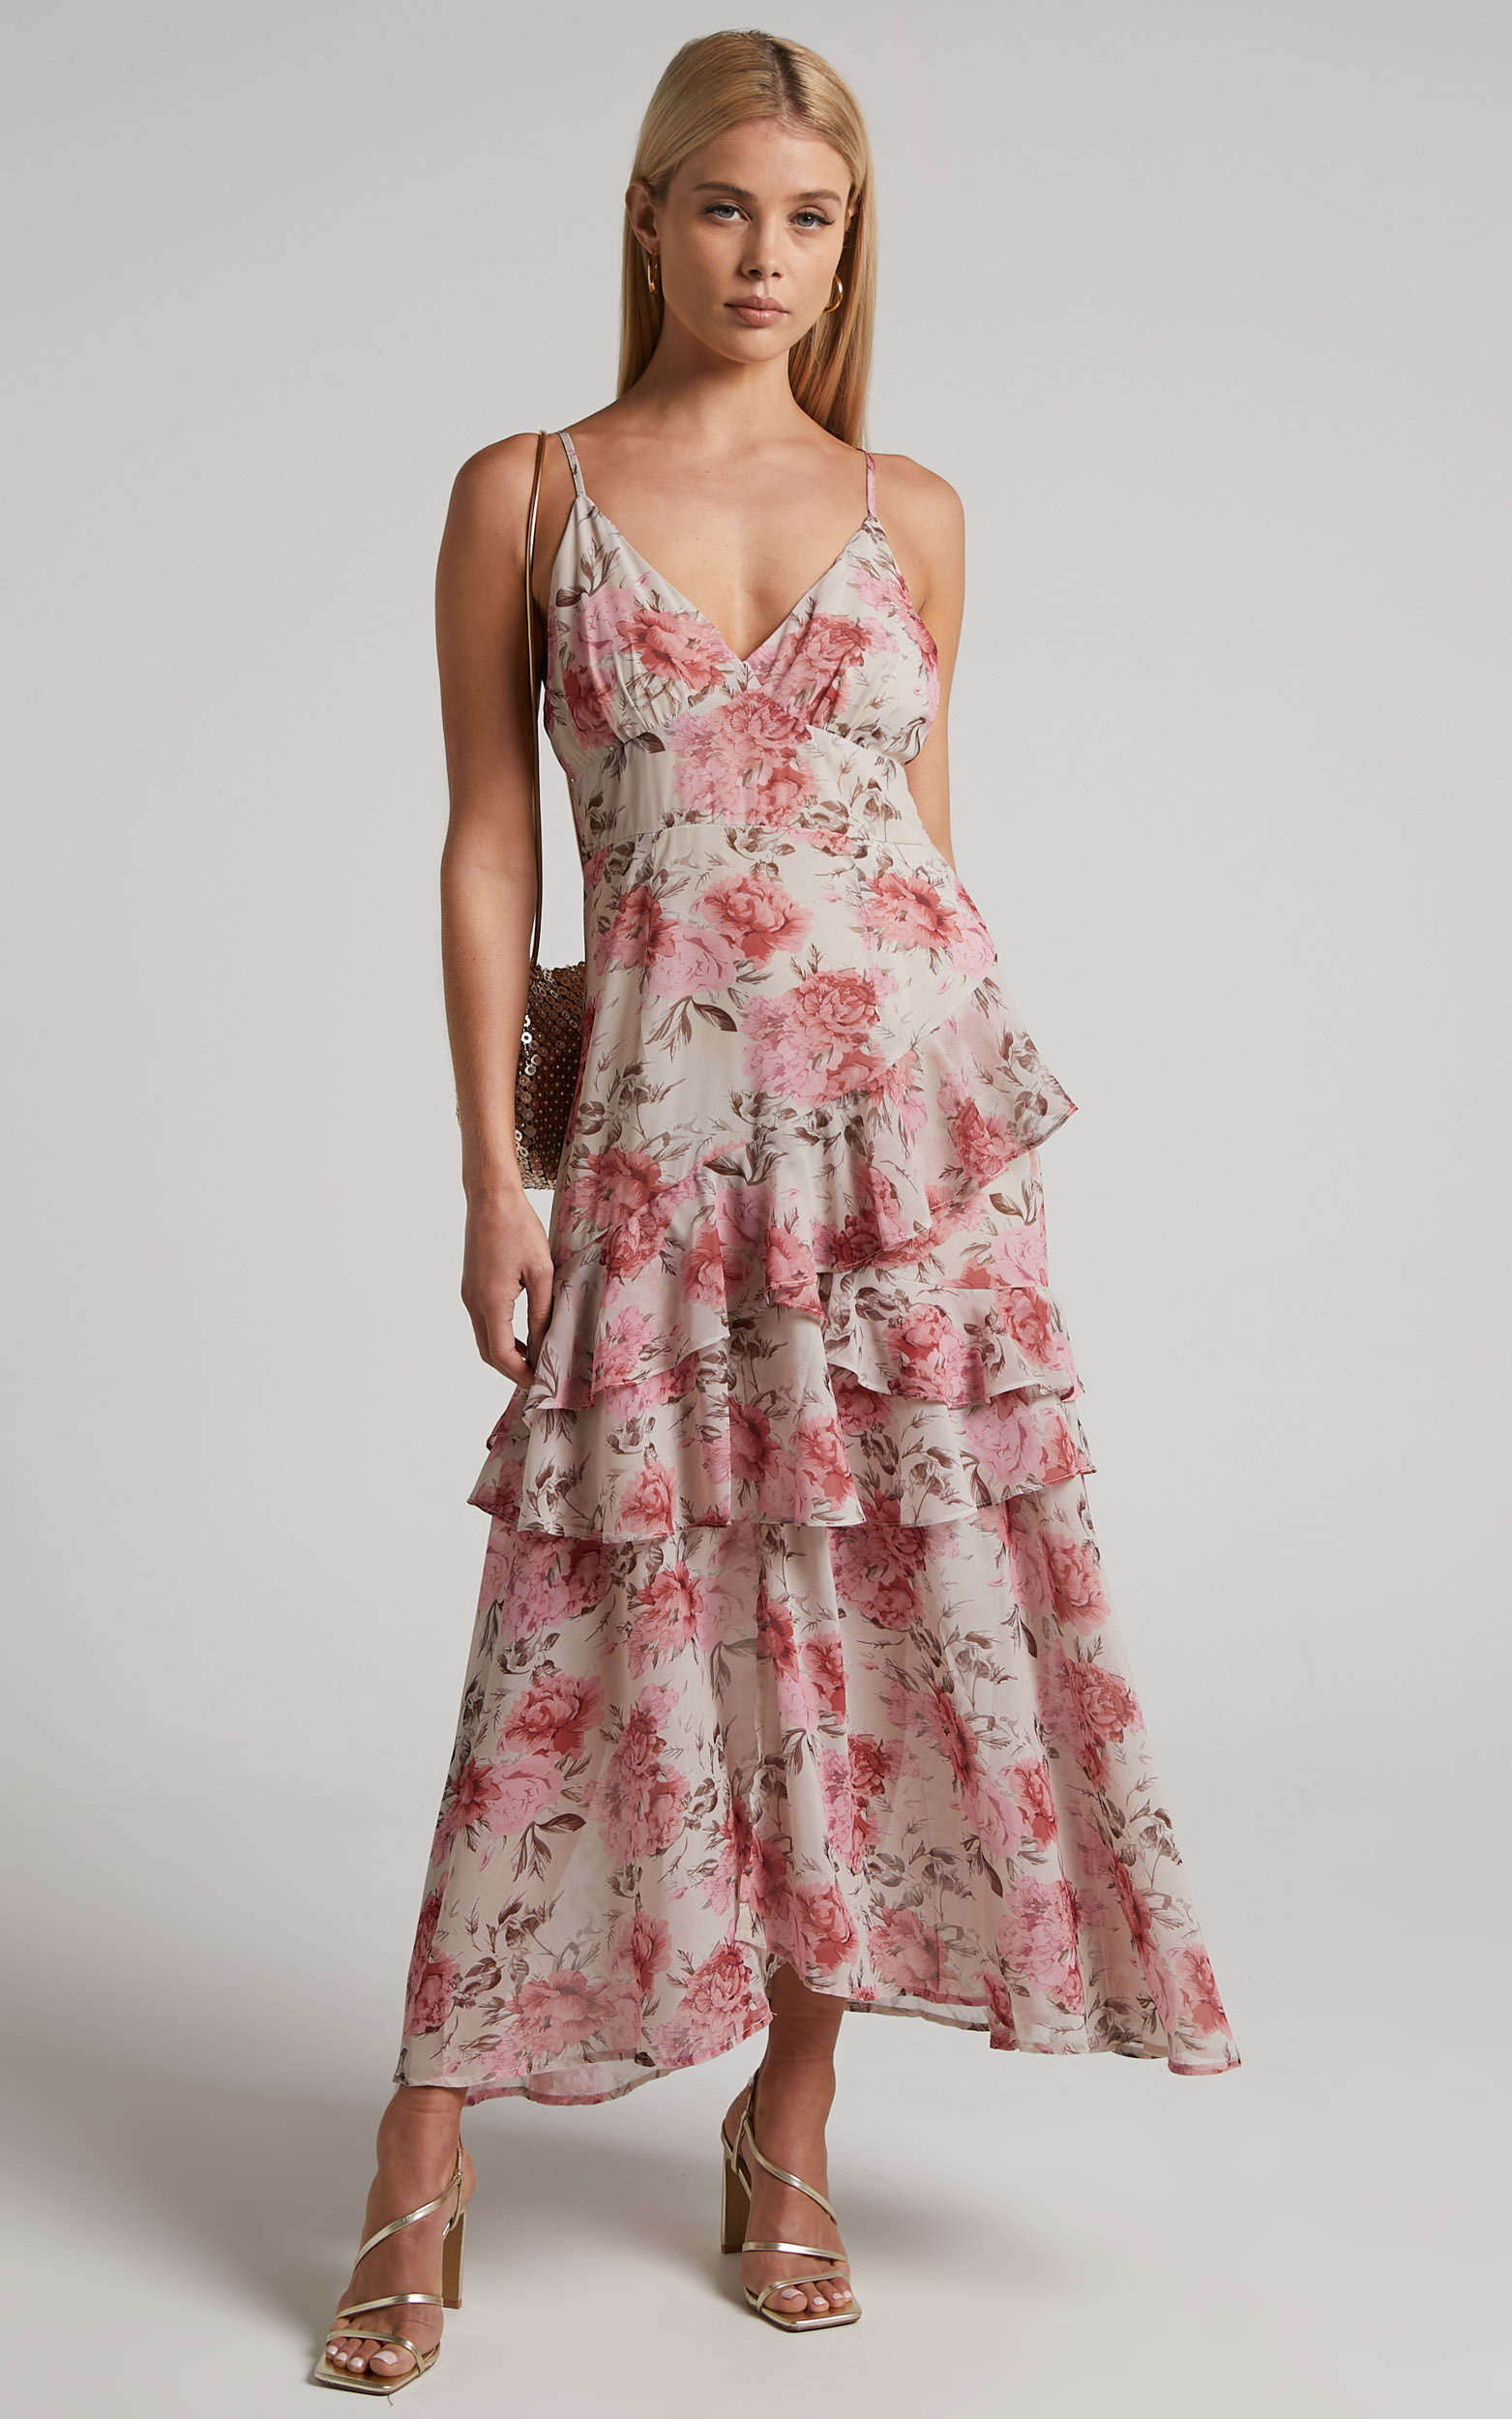 Caliope Maxi Dress - V Neck Tiered Ruffle Dress in Pink Floral | Showpo USA